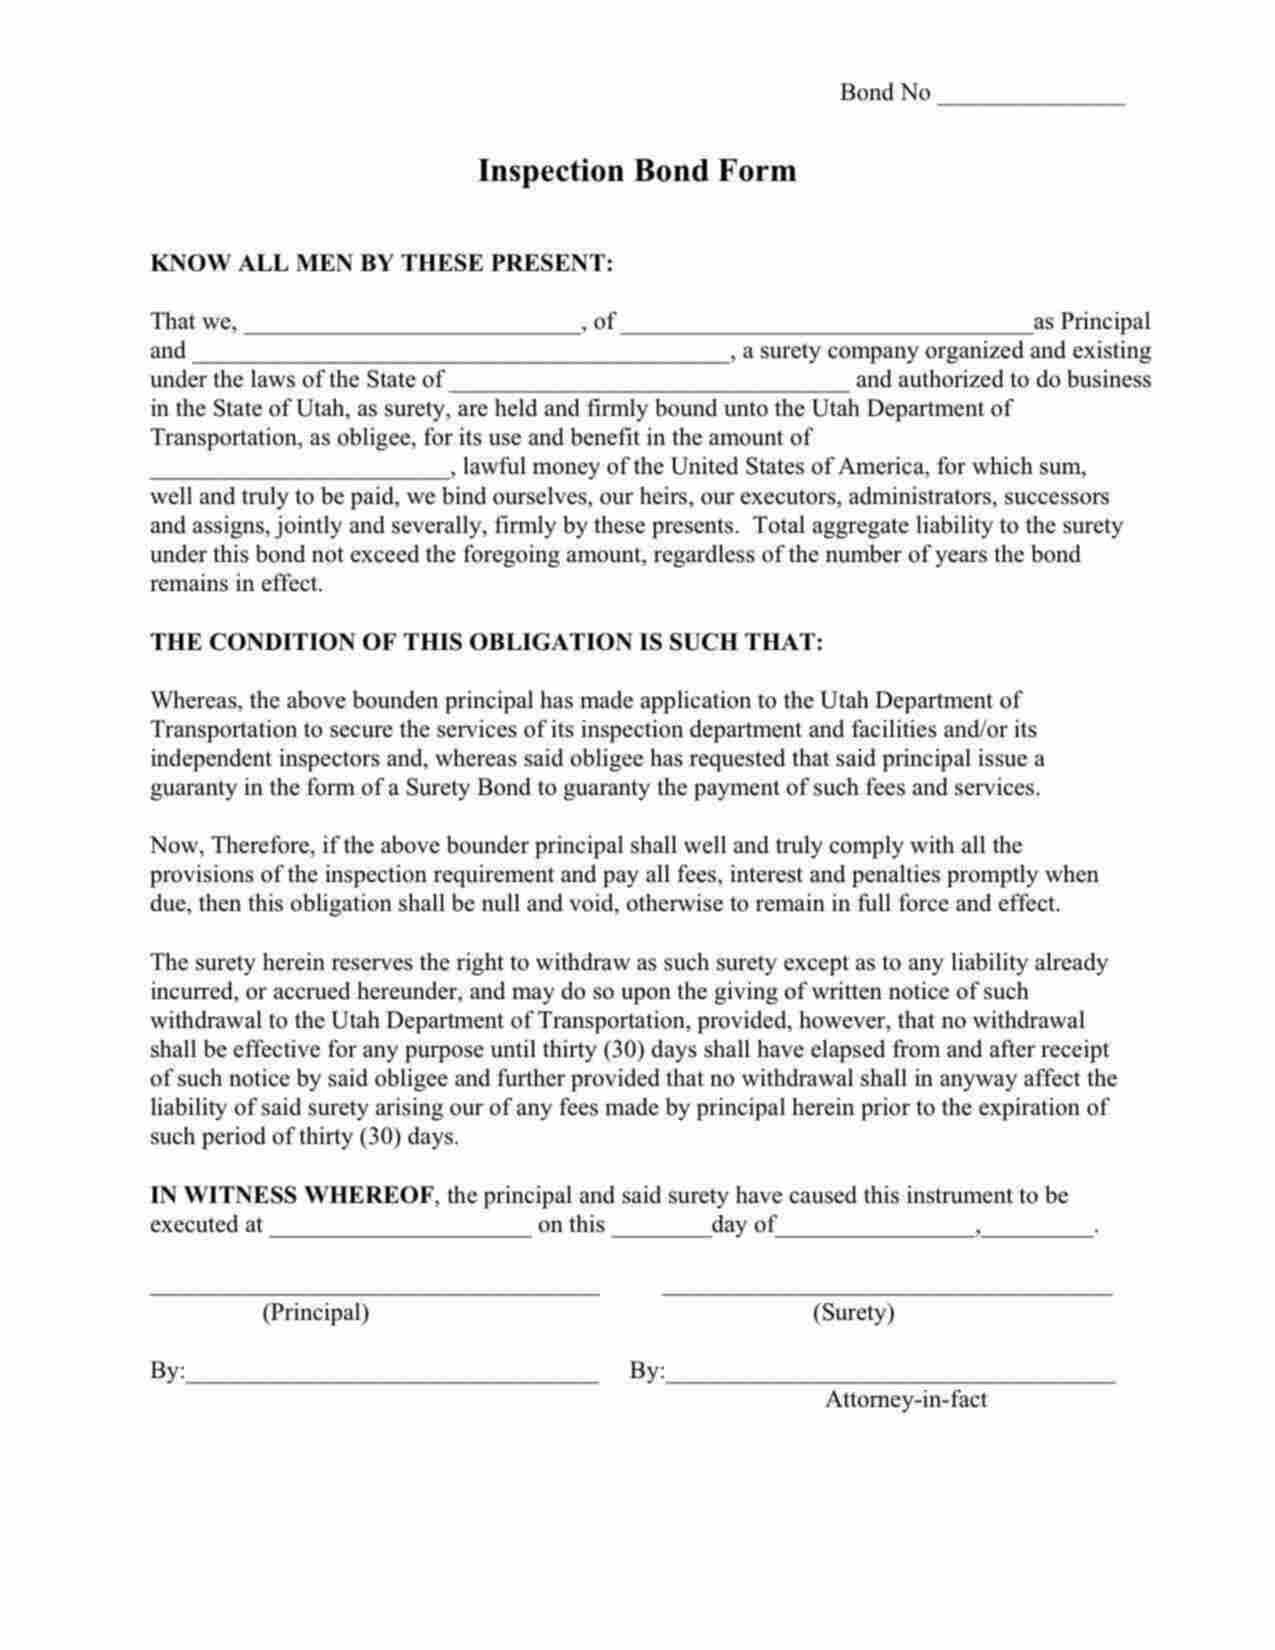 Utah Inspection Fees and Services Bond Form